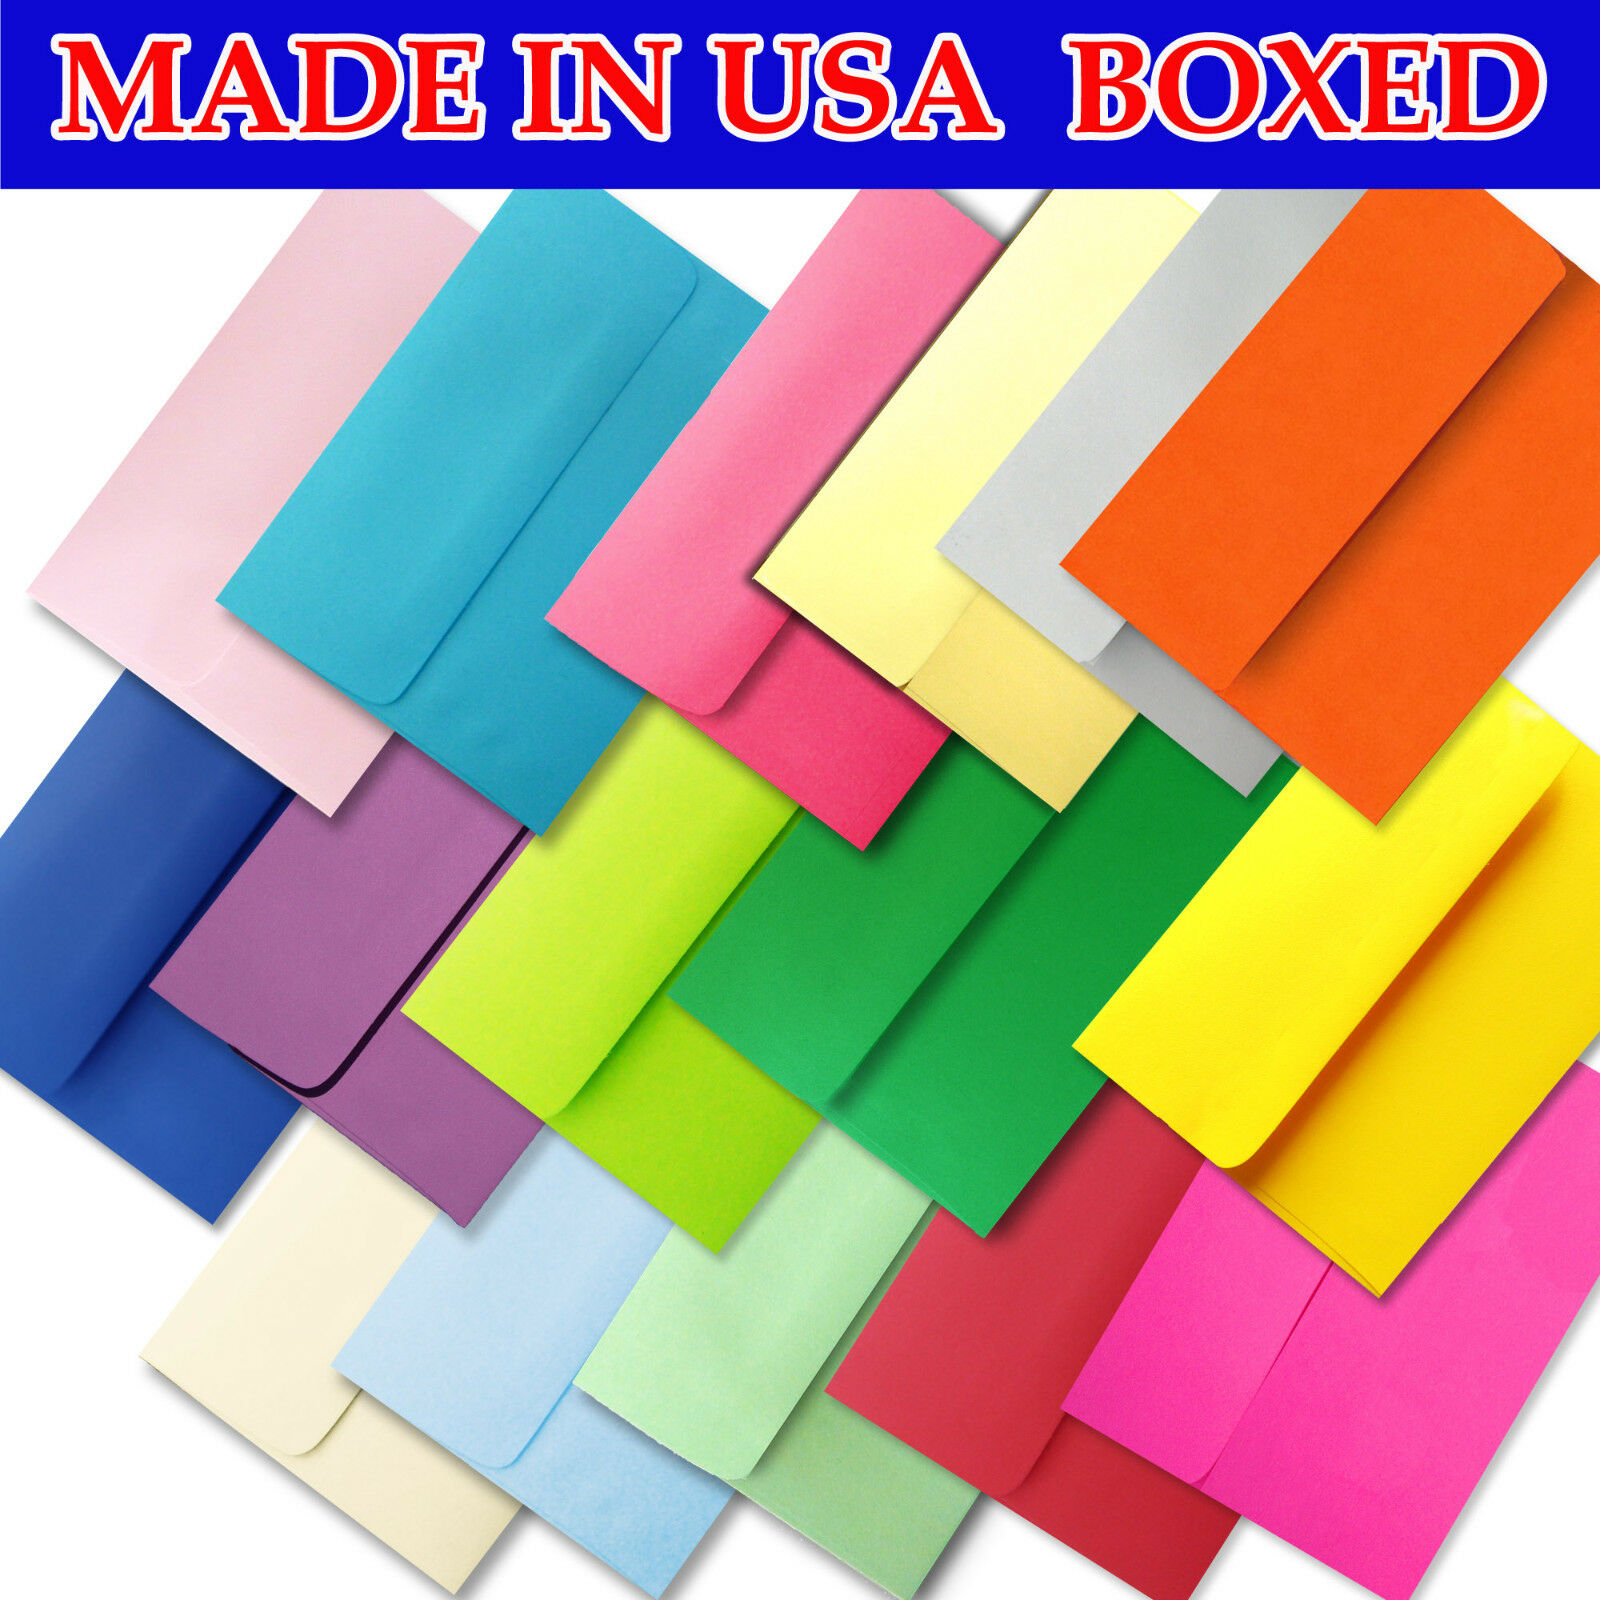 50 Boxed Multi Colored Assorted Envelopes For Response Greeting Cards A2 A6 A7